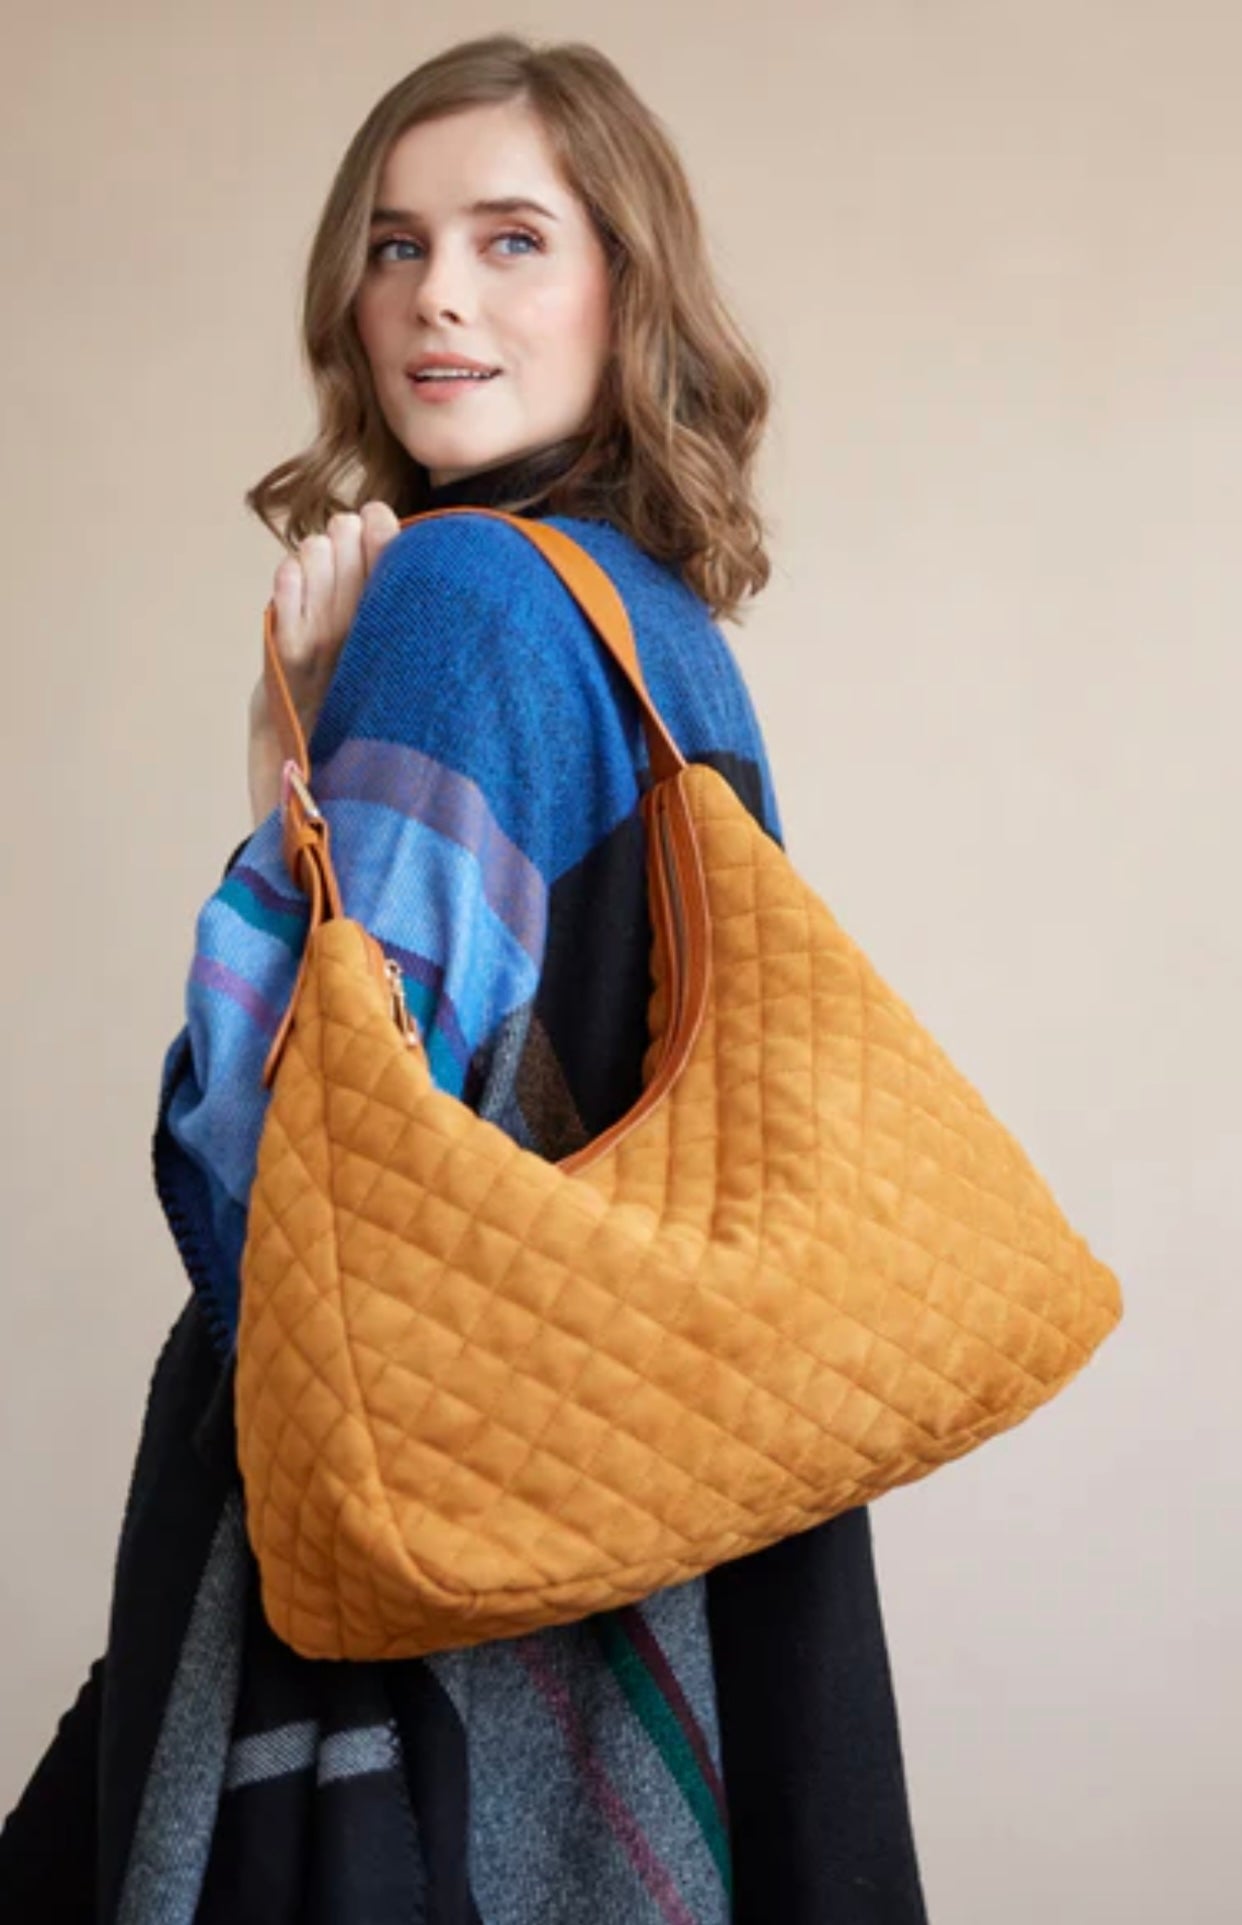 Hale Quilted Hobo 2 colors